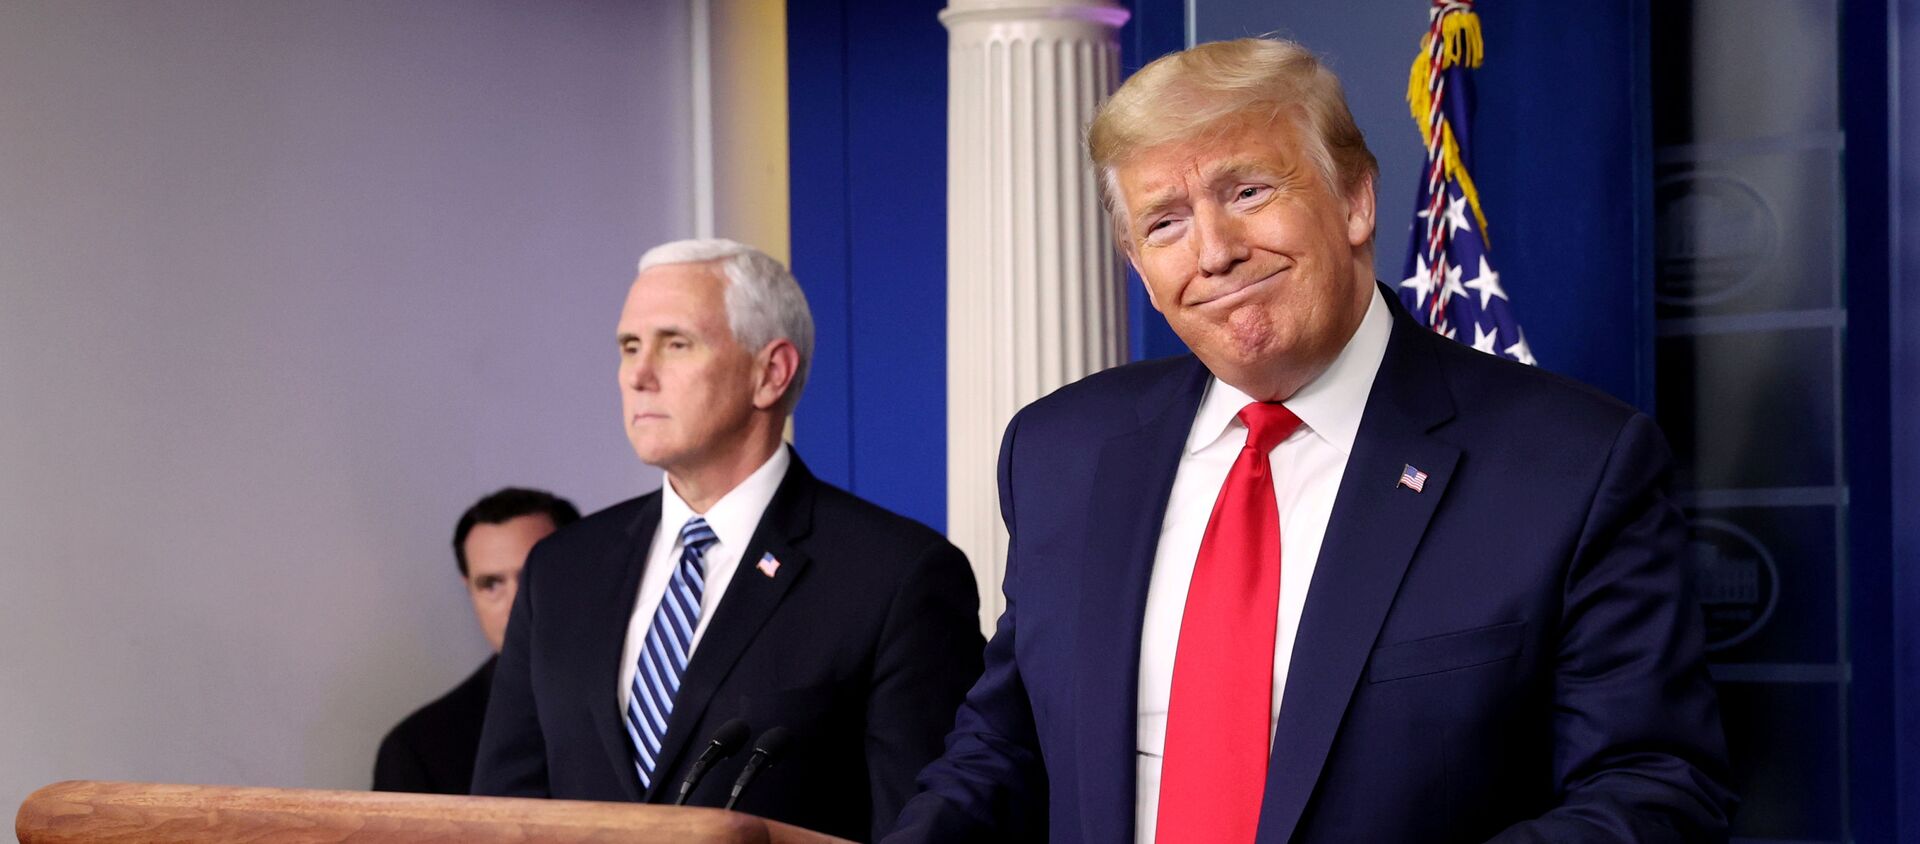 US President Donald Trump arrives with Vice President Mike Pence to lead the daily coronavirus task force briefing at the White House in Washington, US, 9 April 2020 - Sputnik International, 1920, 18.04.2020